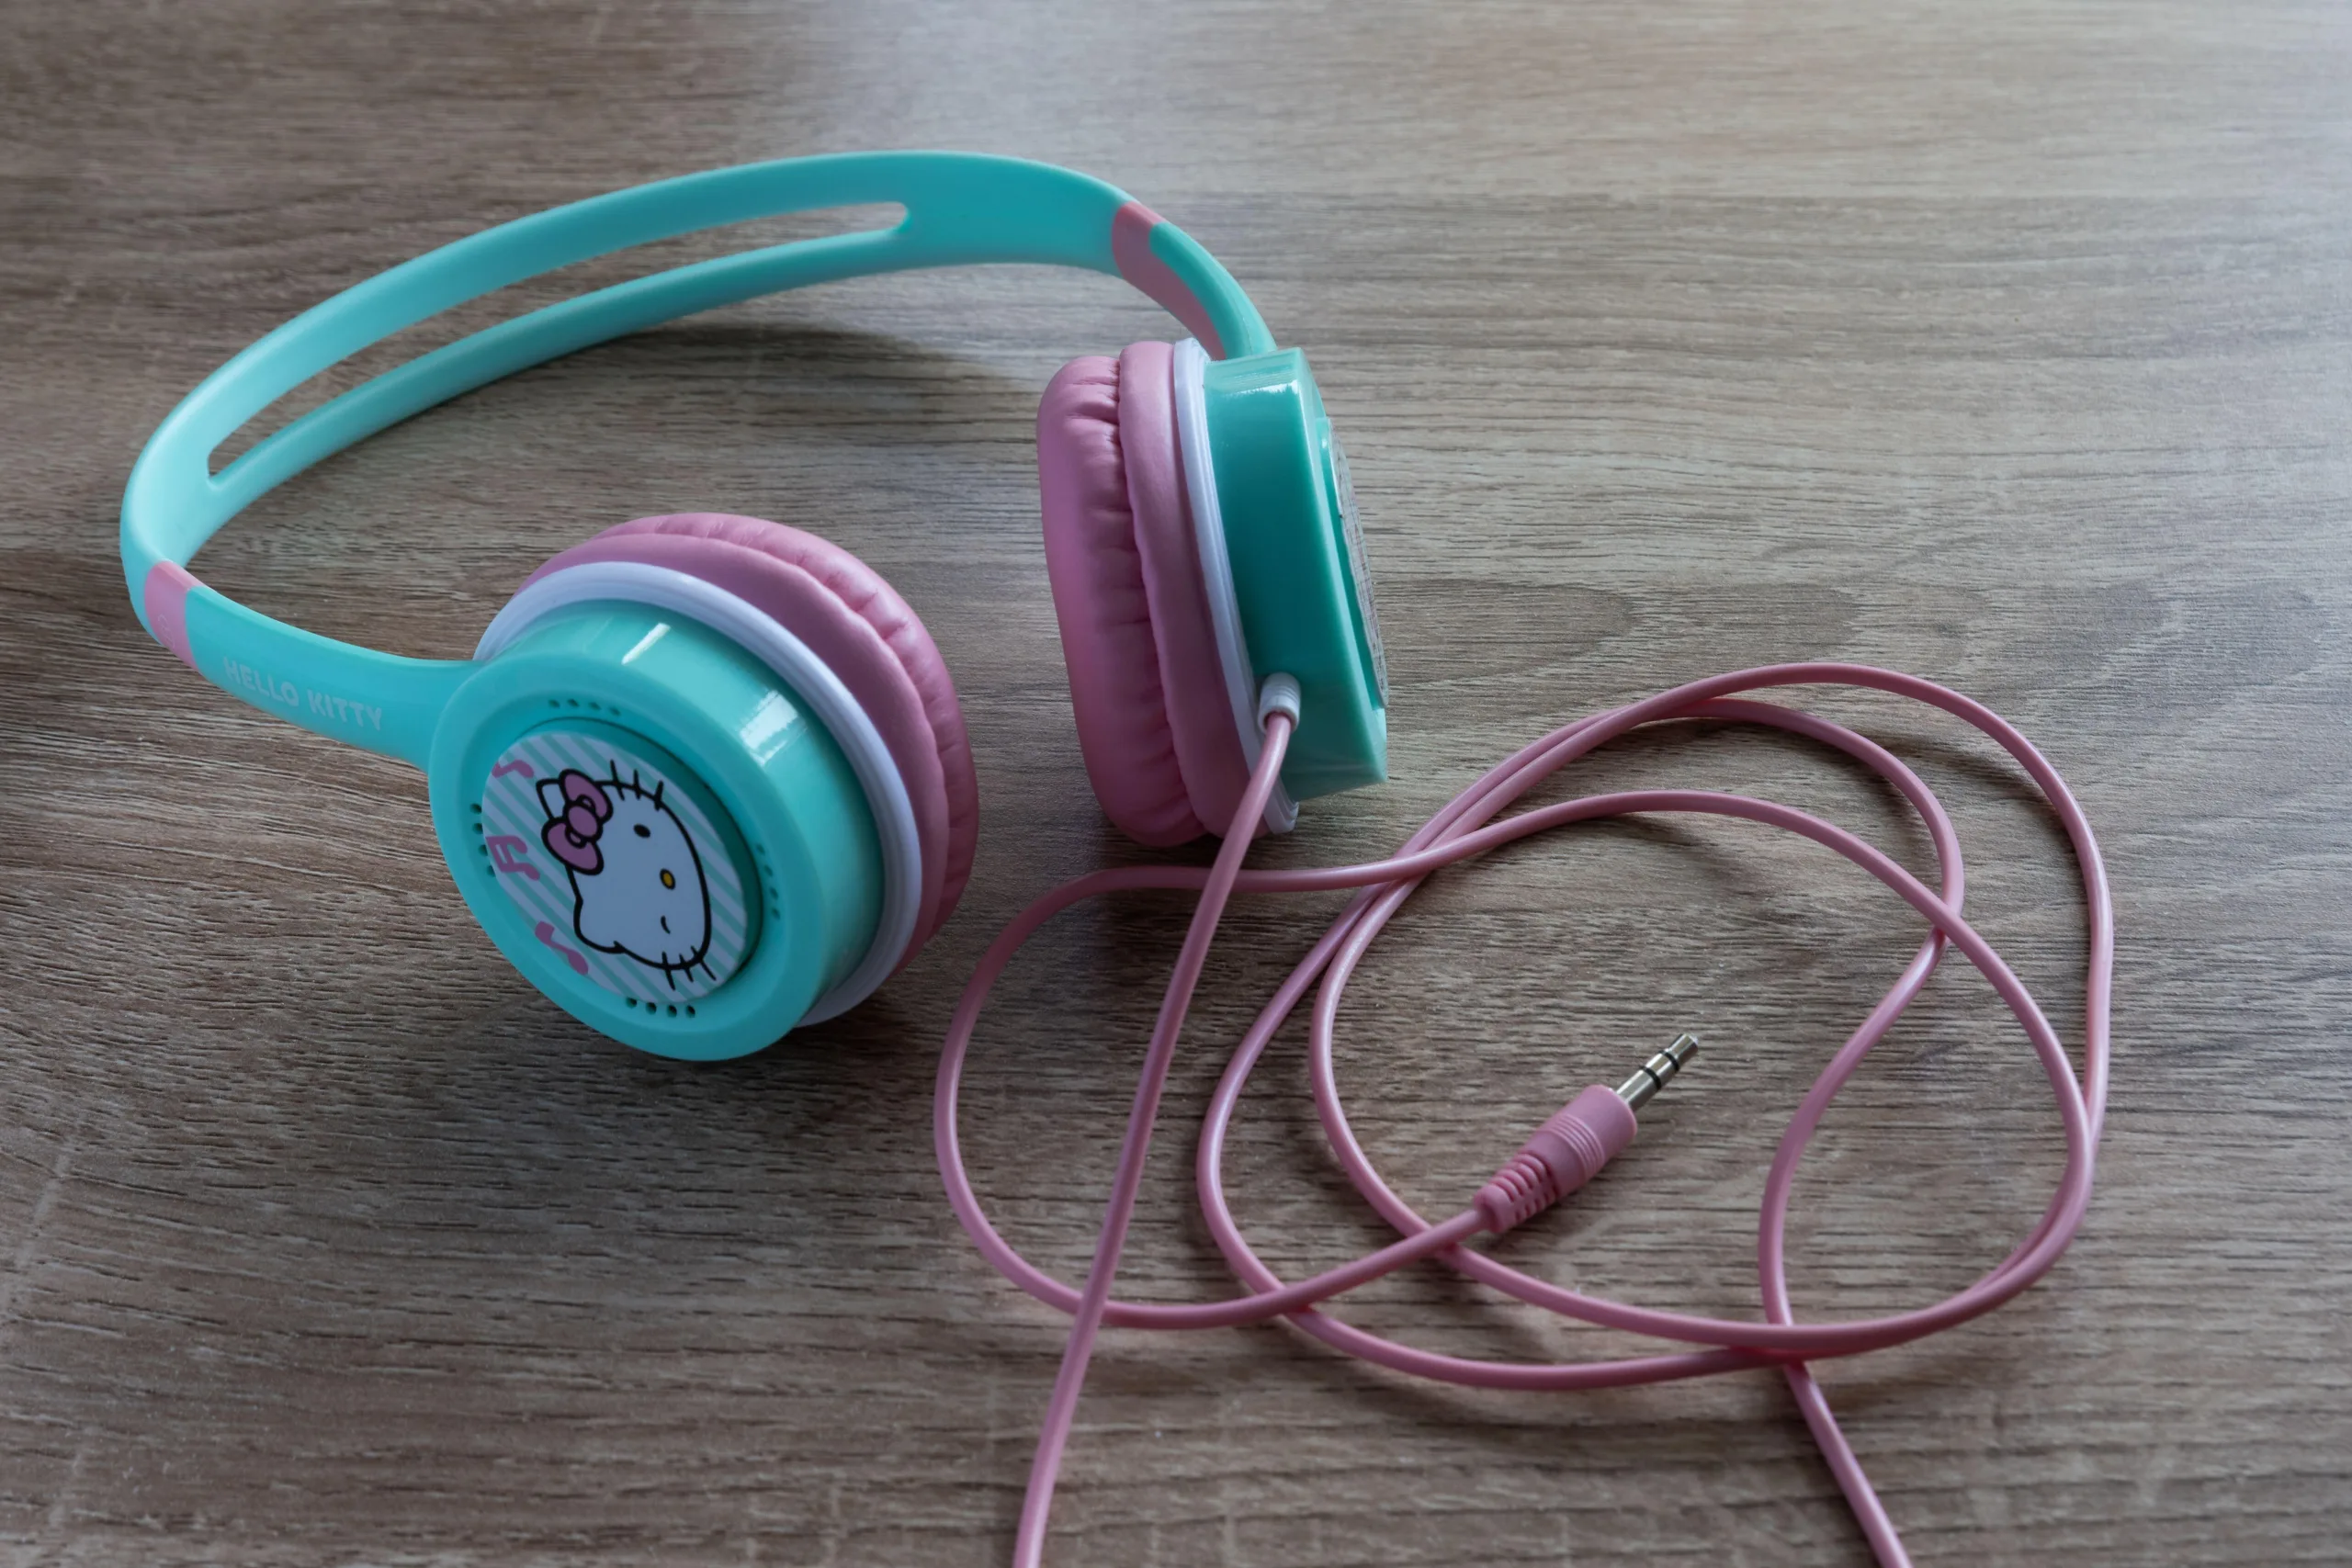 Blue and pink headphones with Hello Kitty logo